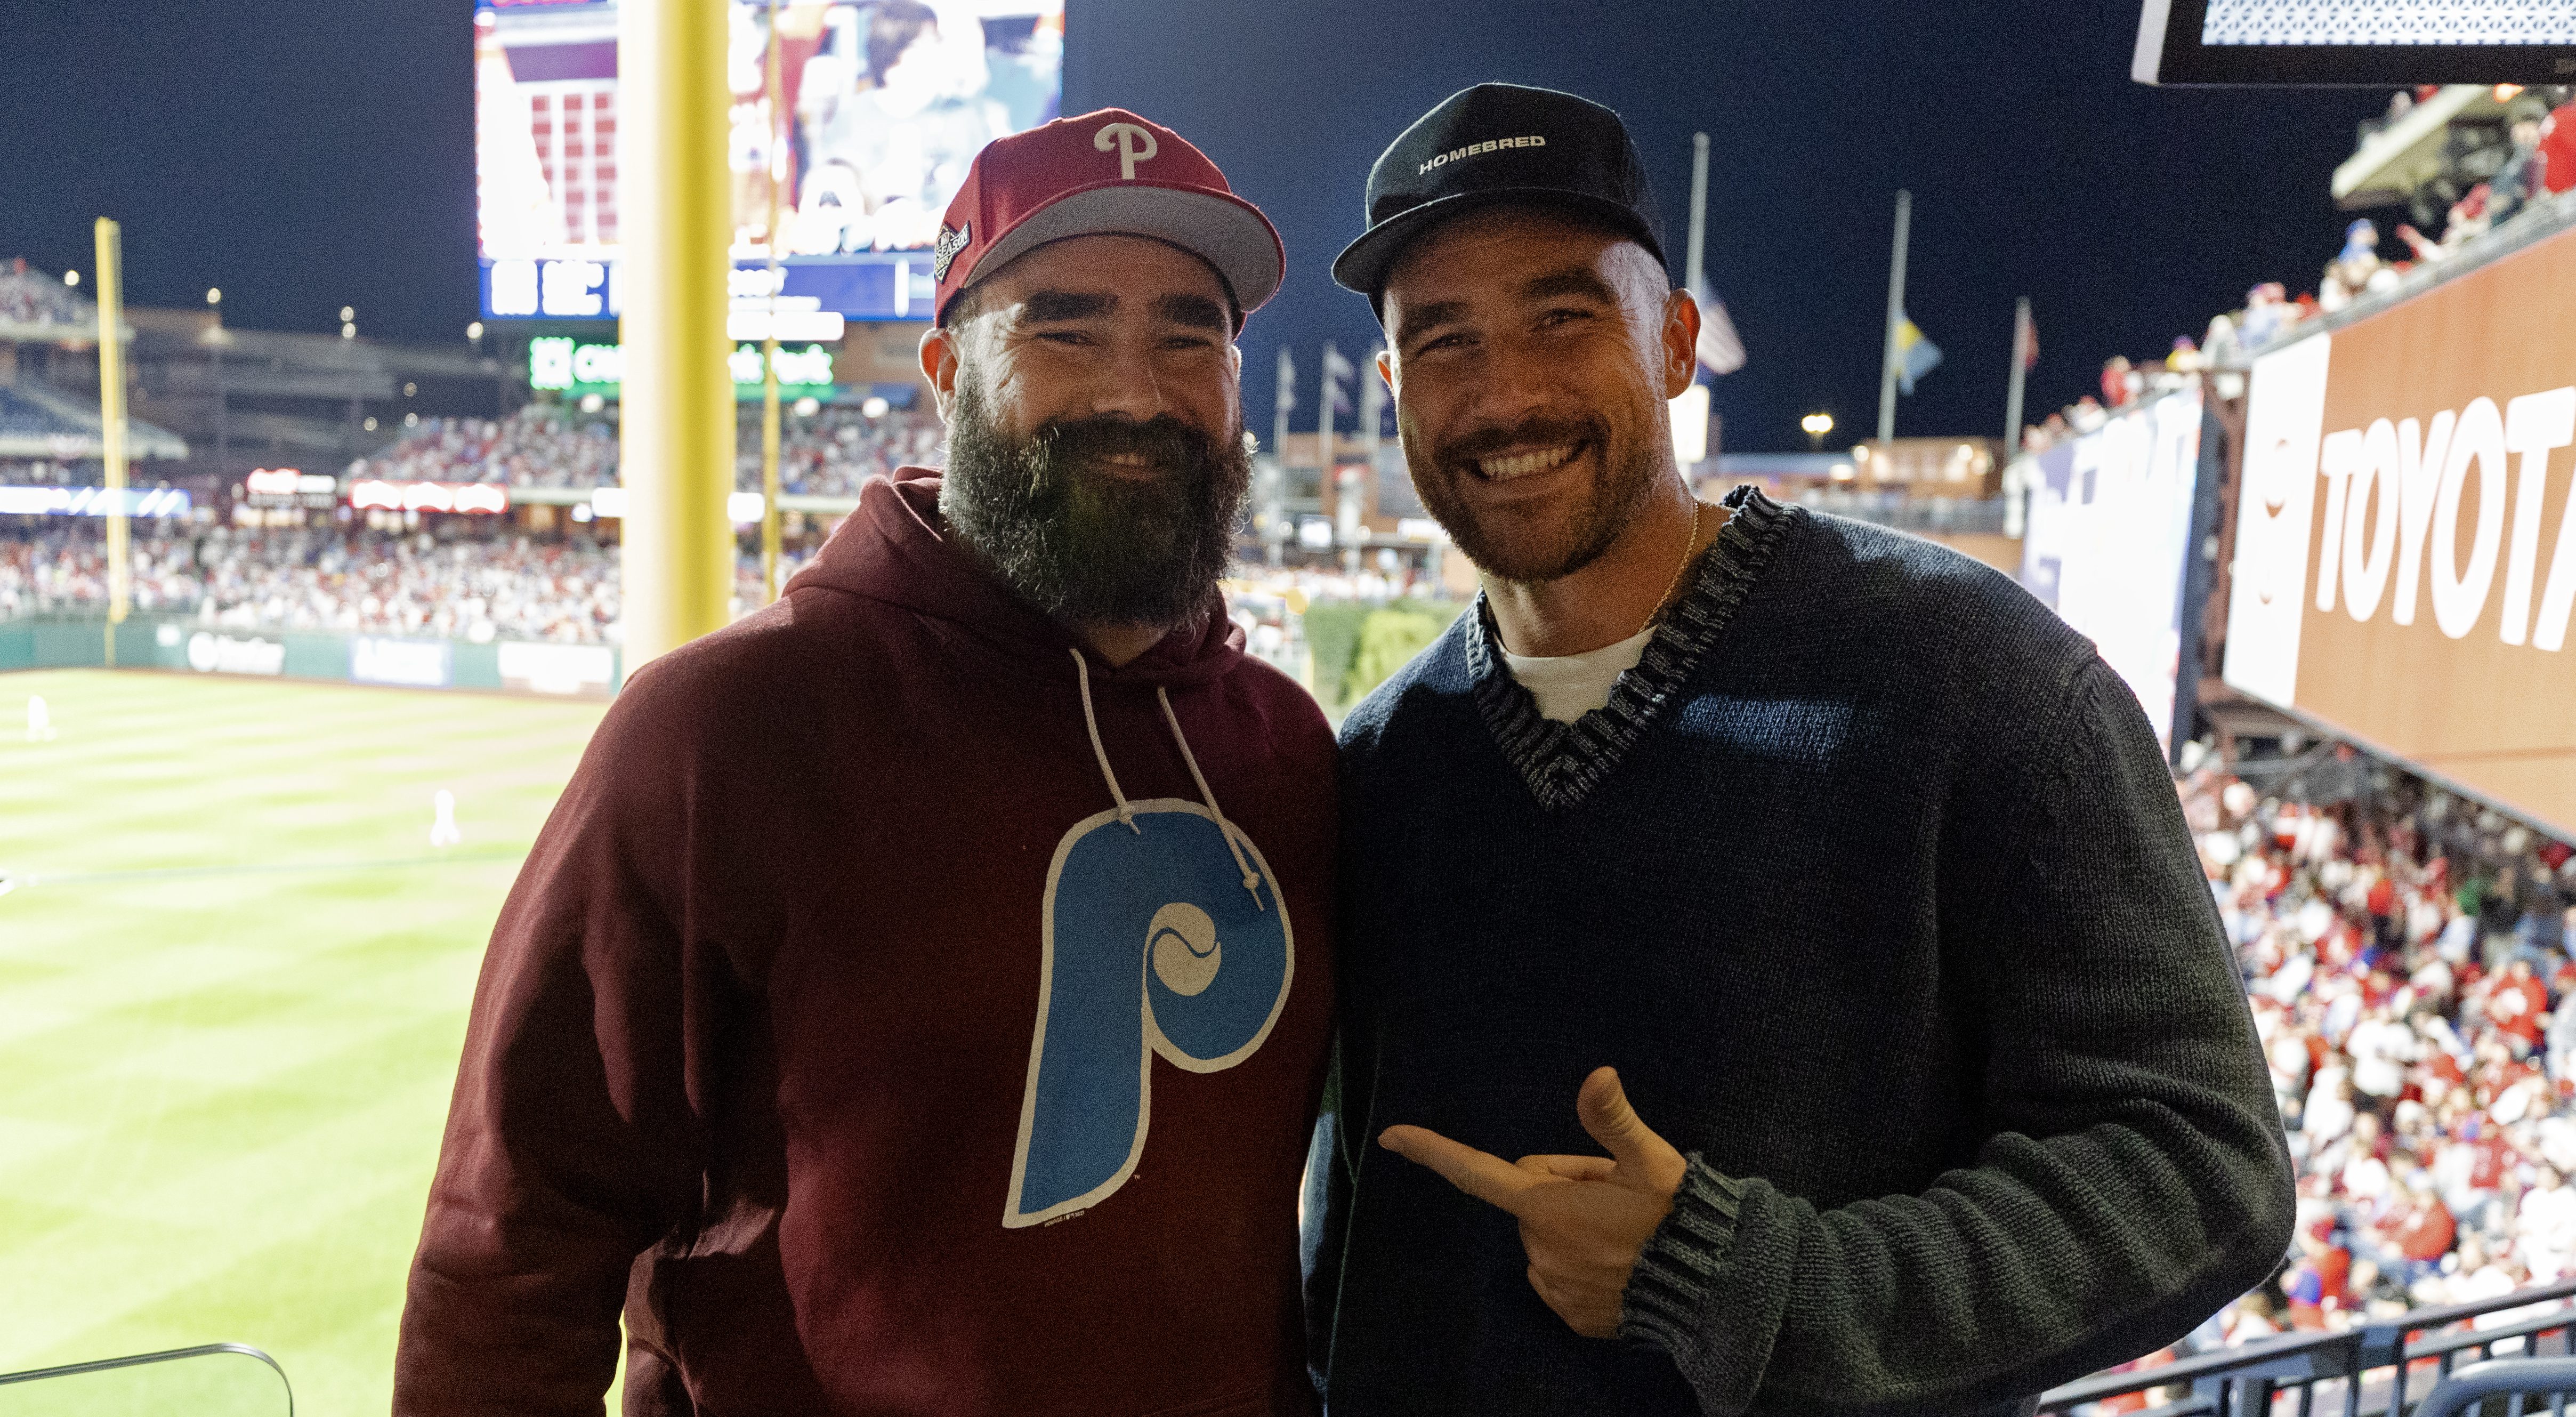 PHILADELPHIA, PA - OCTOBER 16: Jason and Travis Kelce pose for a photo during Game 1 of the NLCS between the Arizona Diamondbacks and the Philadelphia Phillies at Citizens Bank Park on Monday, October 16, 2023 in Philadelphia, Pennsylvania.